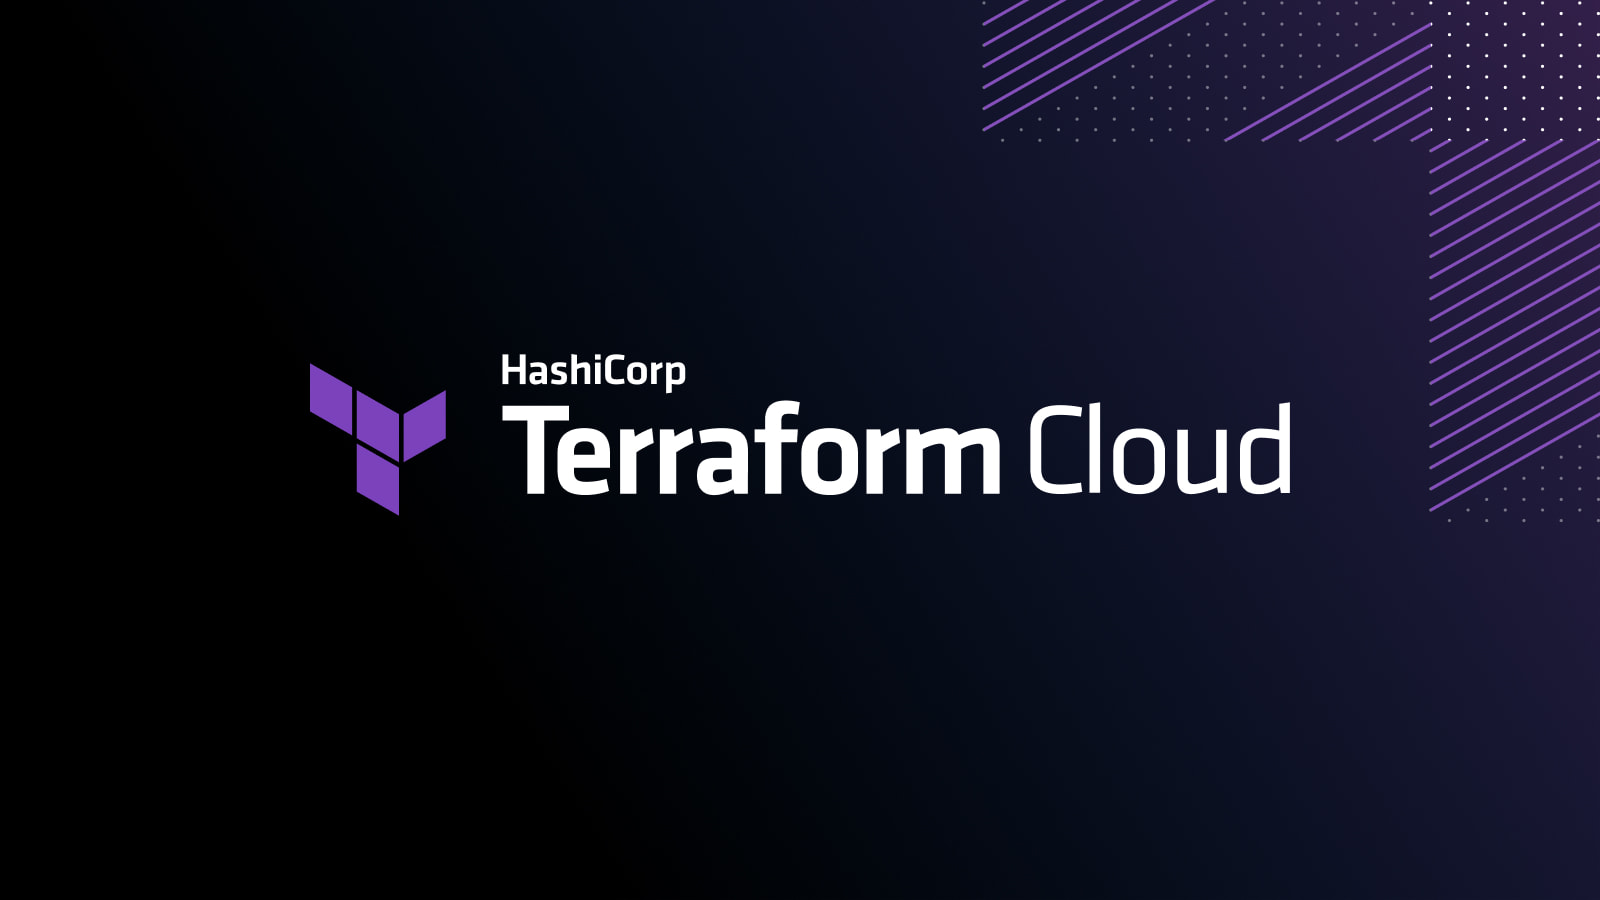 Drift Detection for Terraform Cloud continuously checks infrastructure state to detect and notify operators of any changes, minimizing risk, downtime,